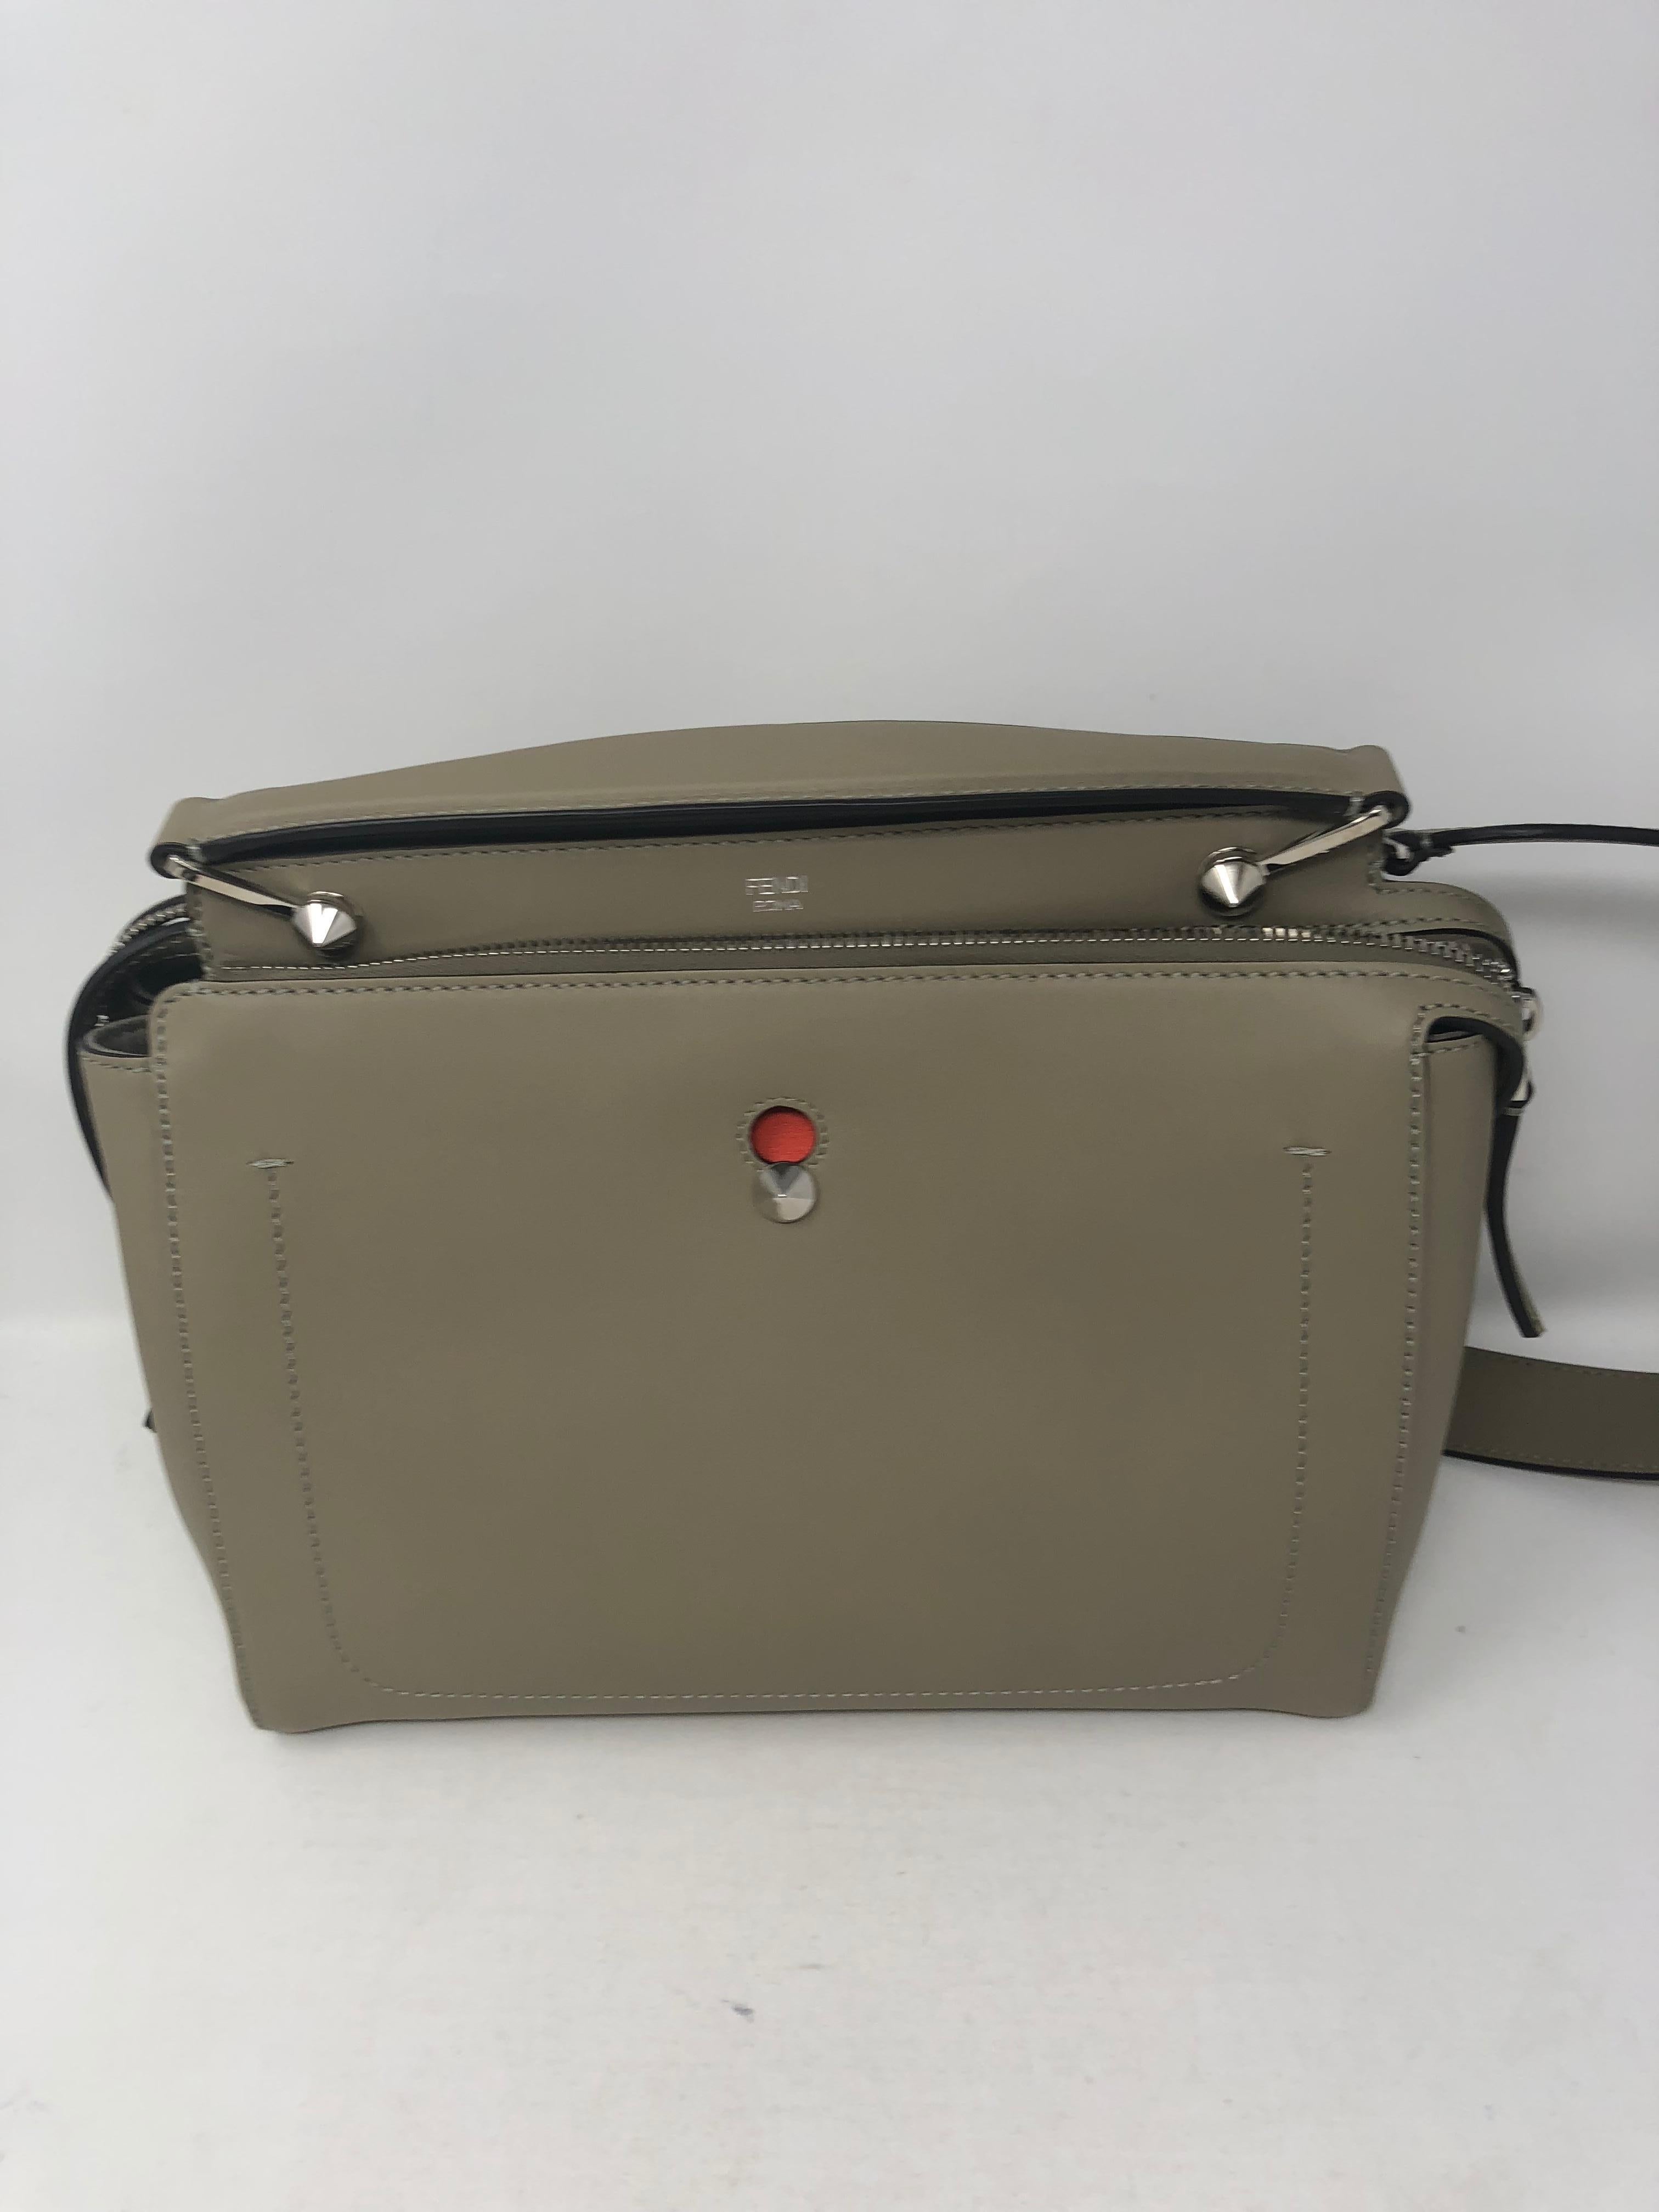 Fendi Dotcom Leather satchel in Dove Gray with red interior. Stunning bag in new condition. Never used. Great neutral color. Stap is detachable. Silver hardware. The inside pouch comes out too. Guaranteed authentic. 